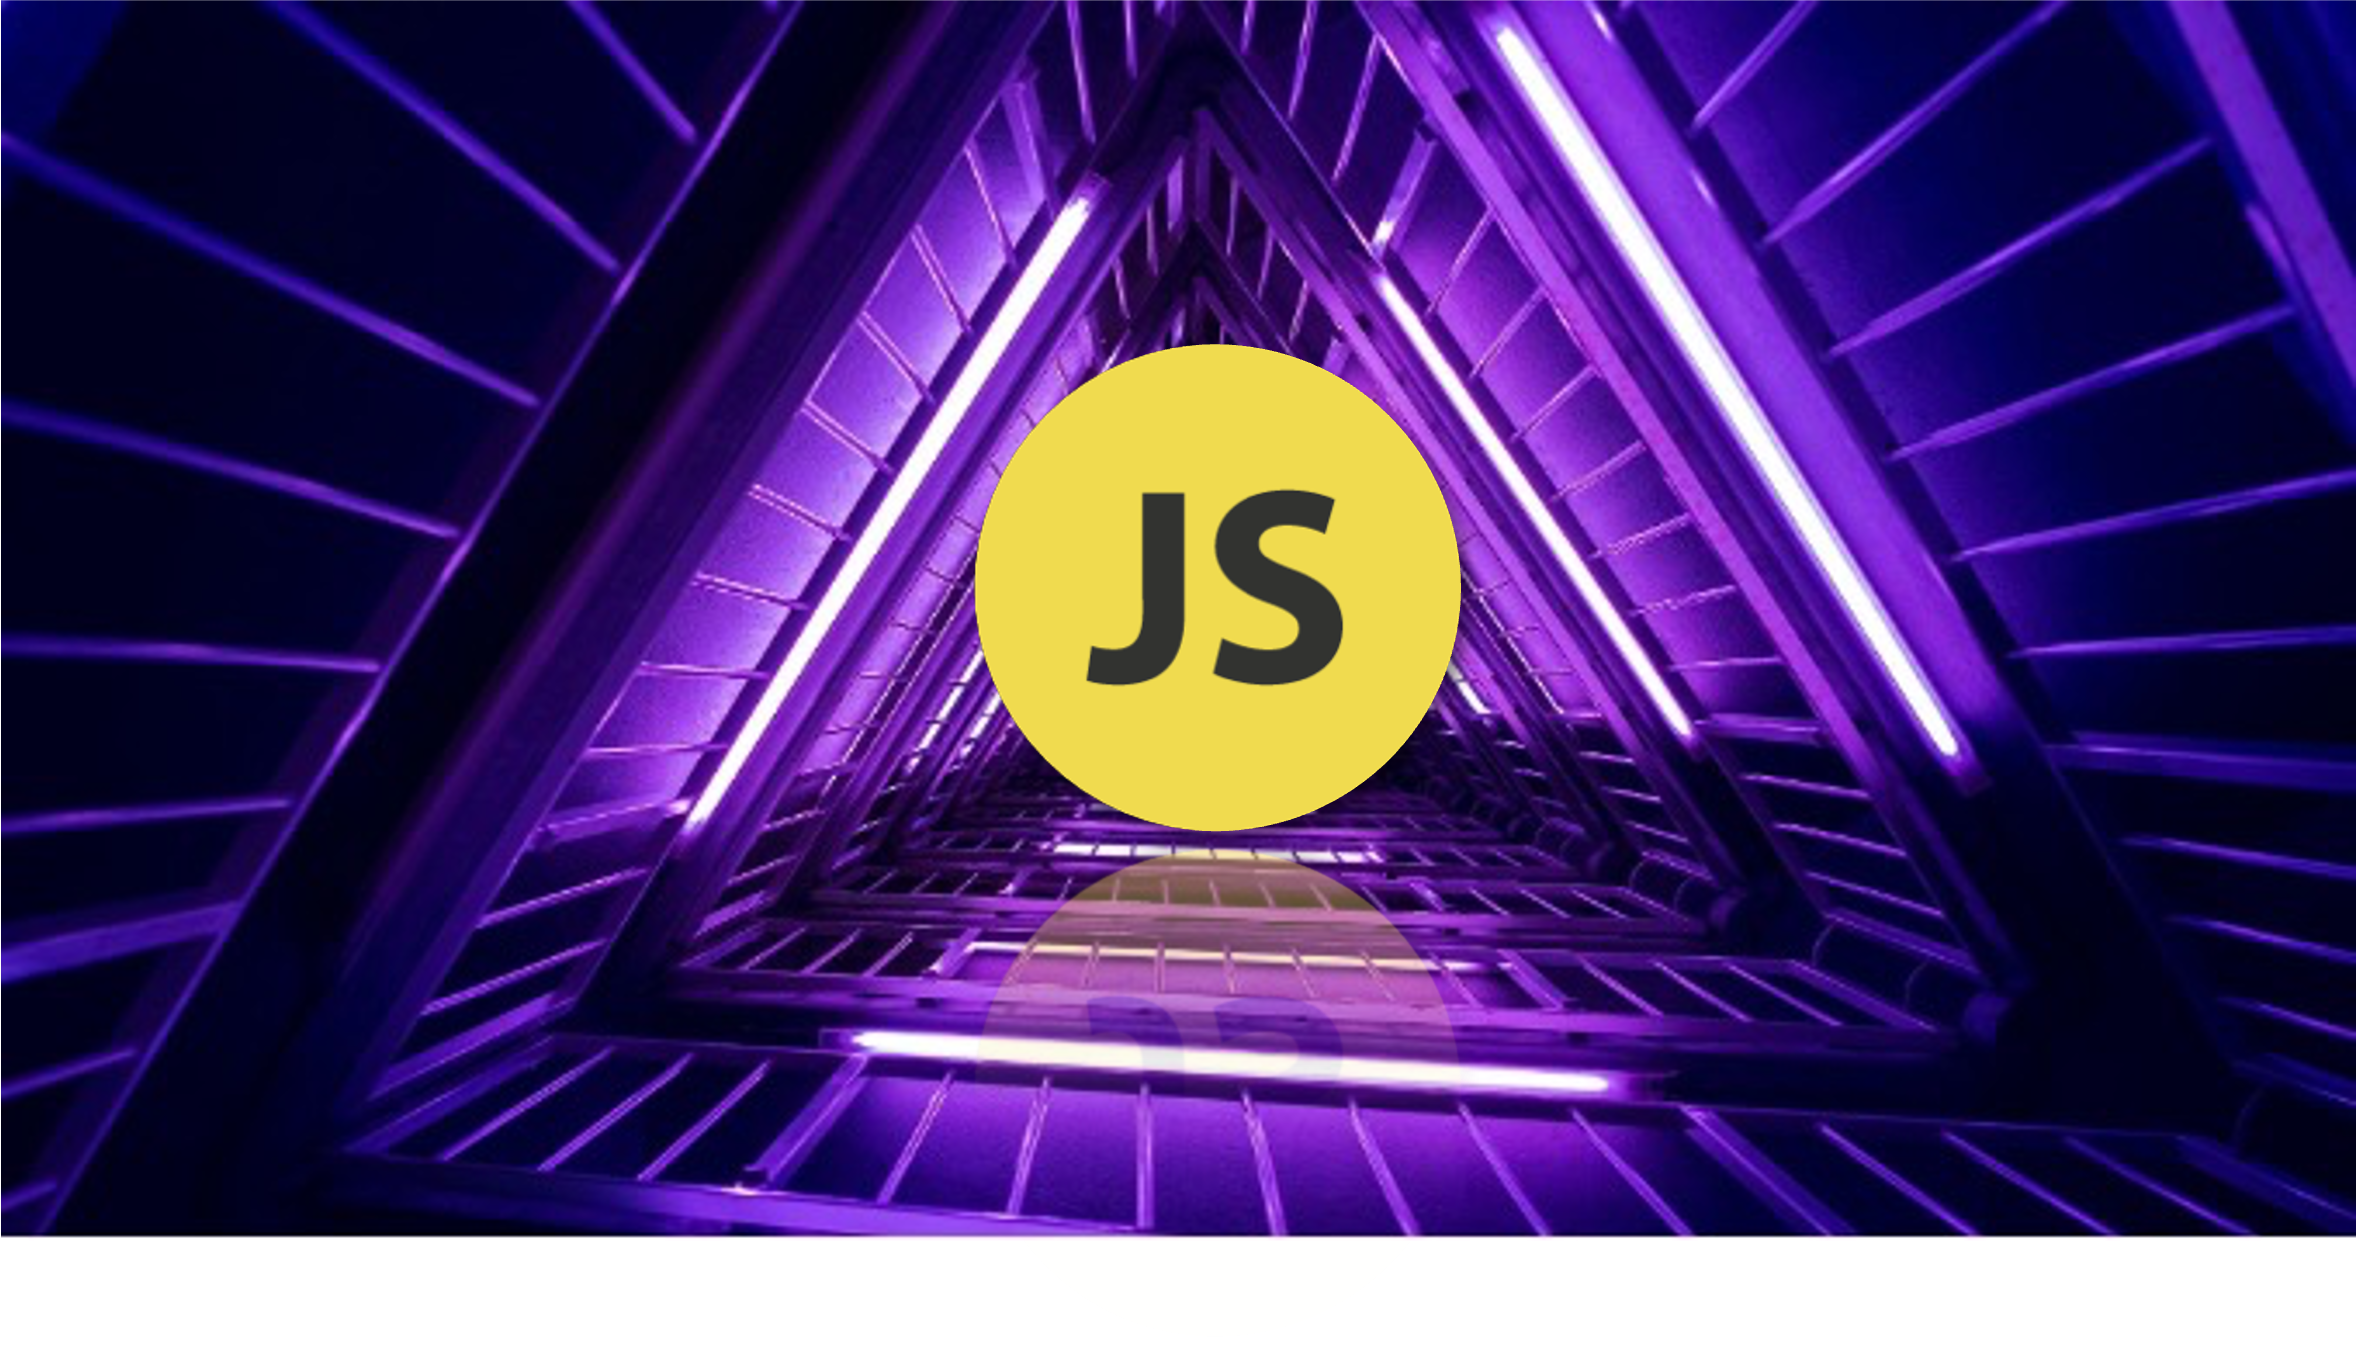 Javascript's logo on an abstract violet background